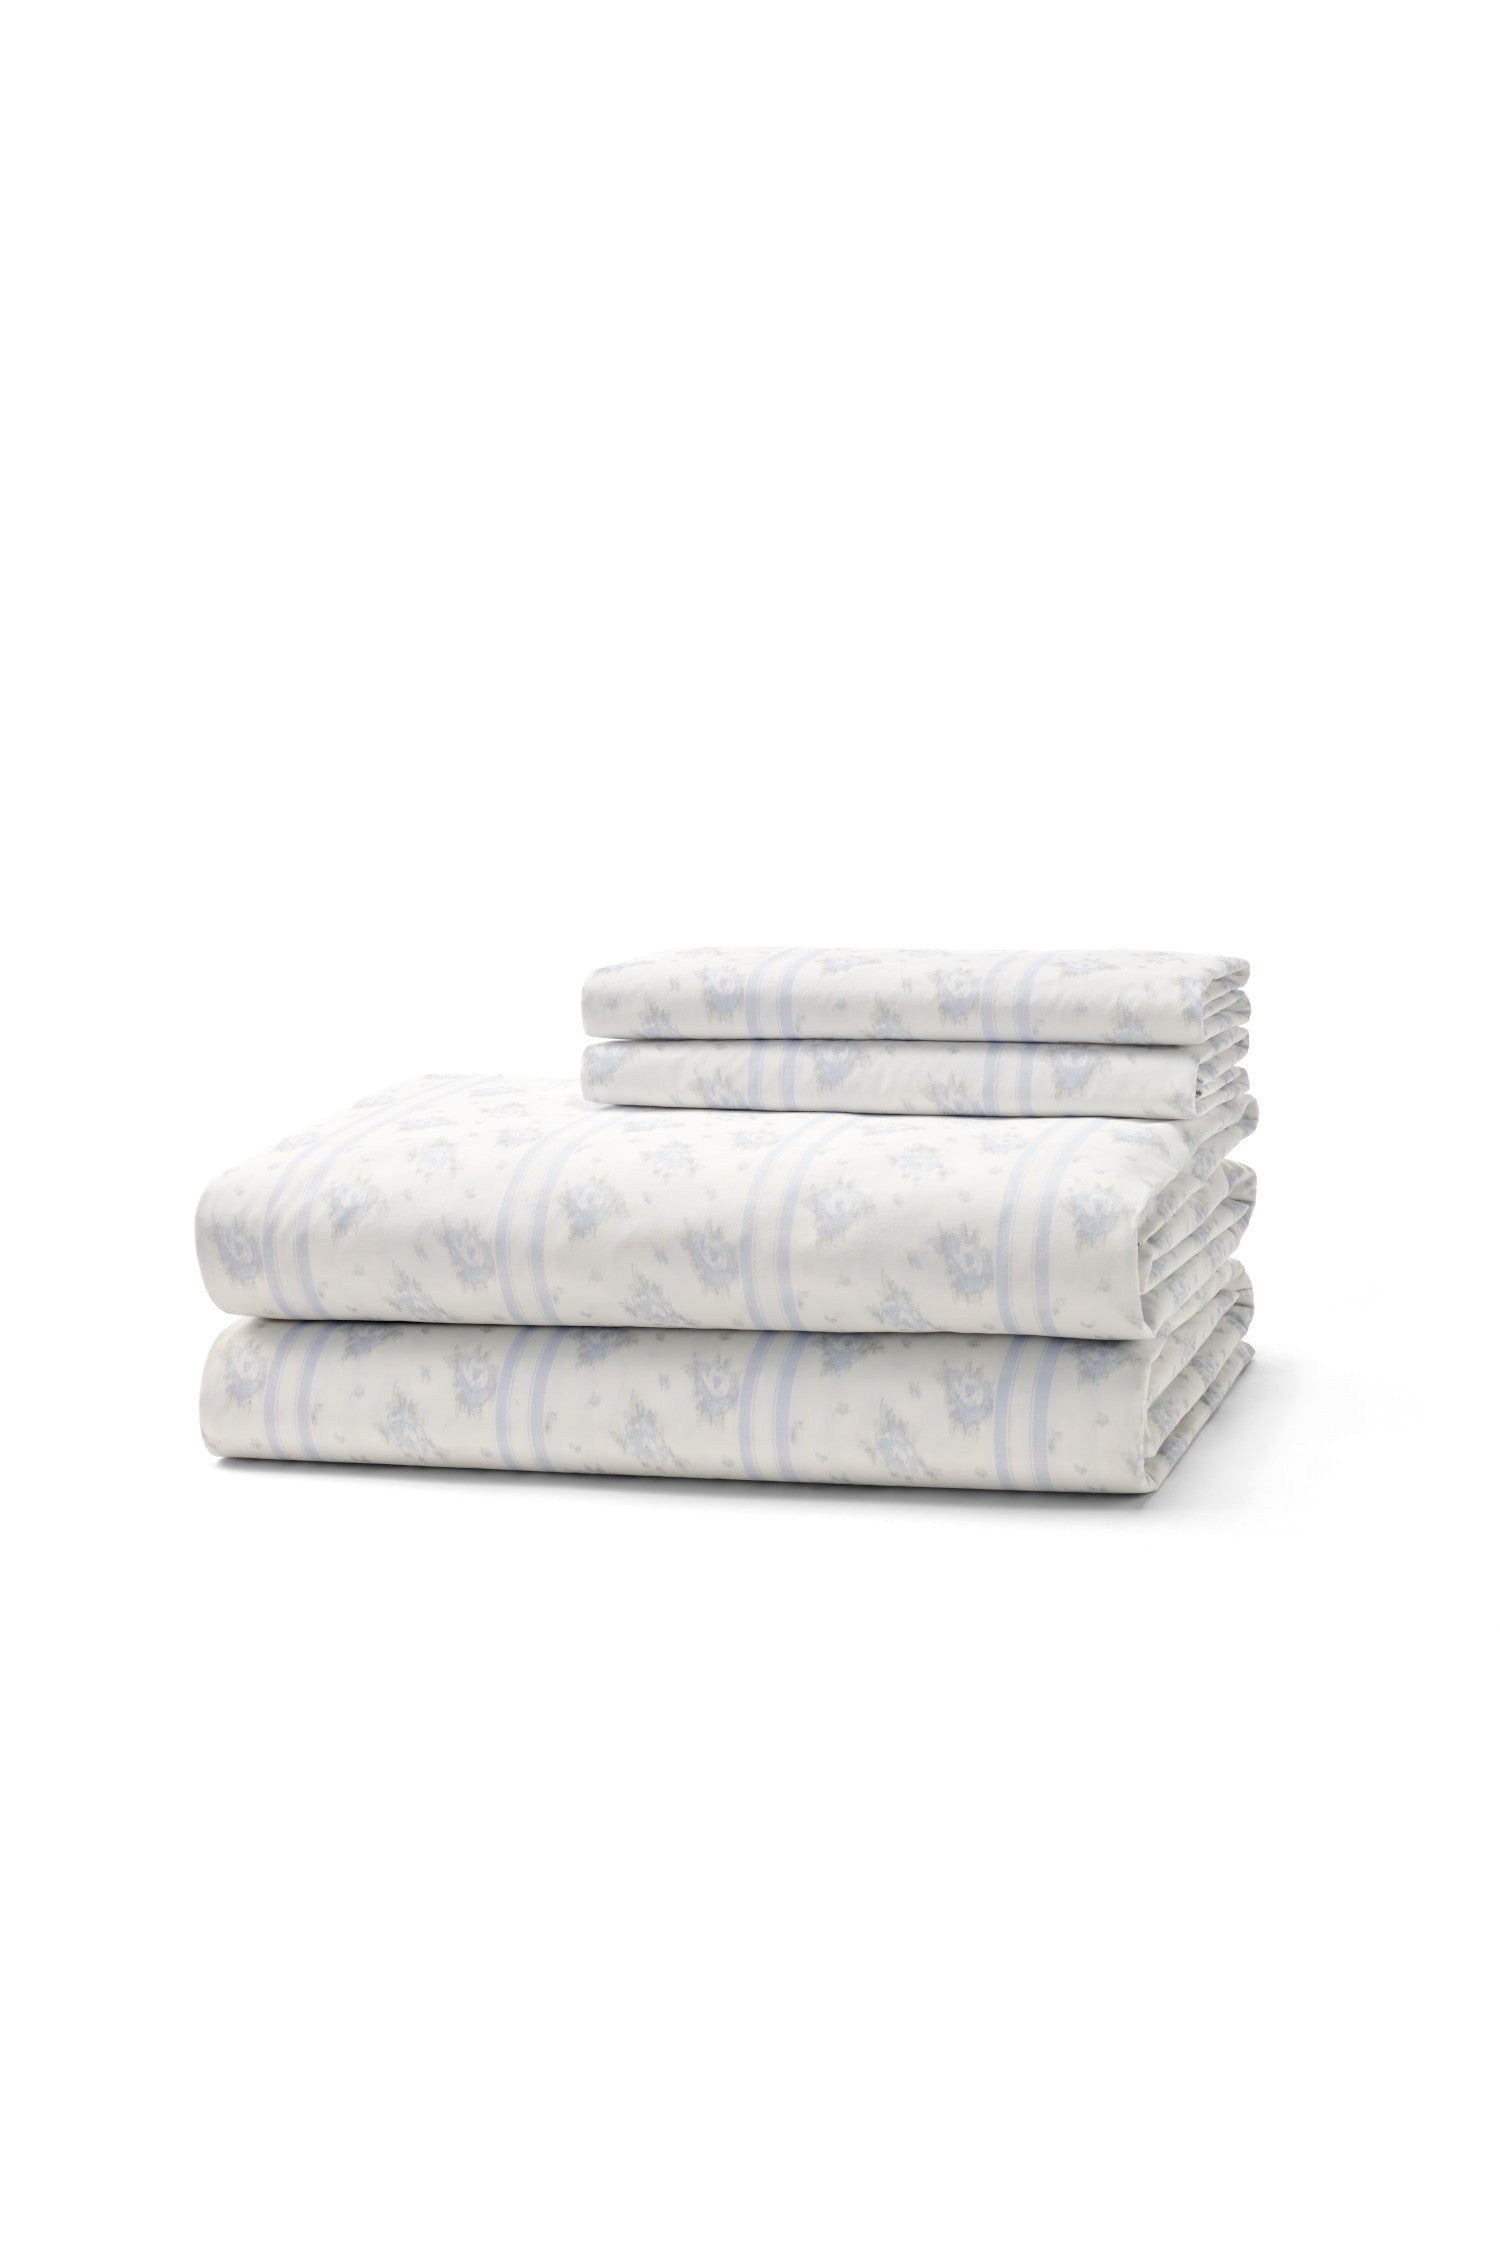 Introducing our lightweight and airy sheets in a beautiful floral blue design. Crafted from 100% cotton, these sheets offer the perfect combination of comfort and breathability.